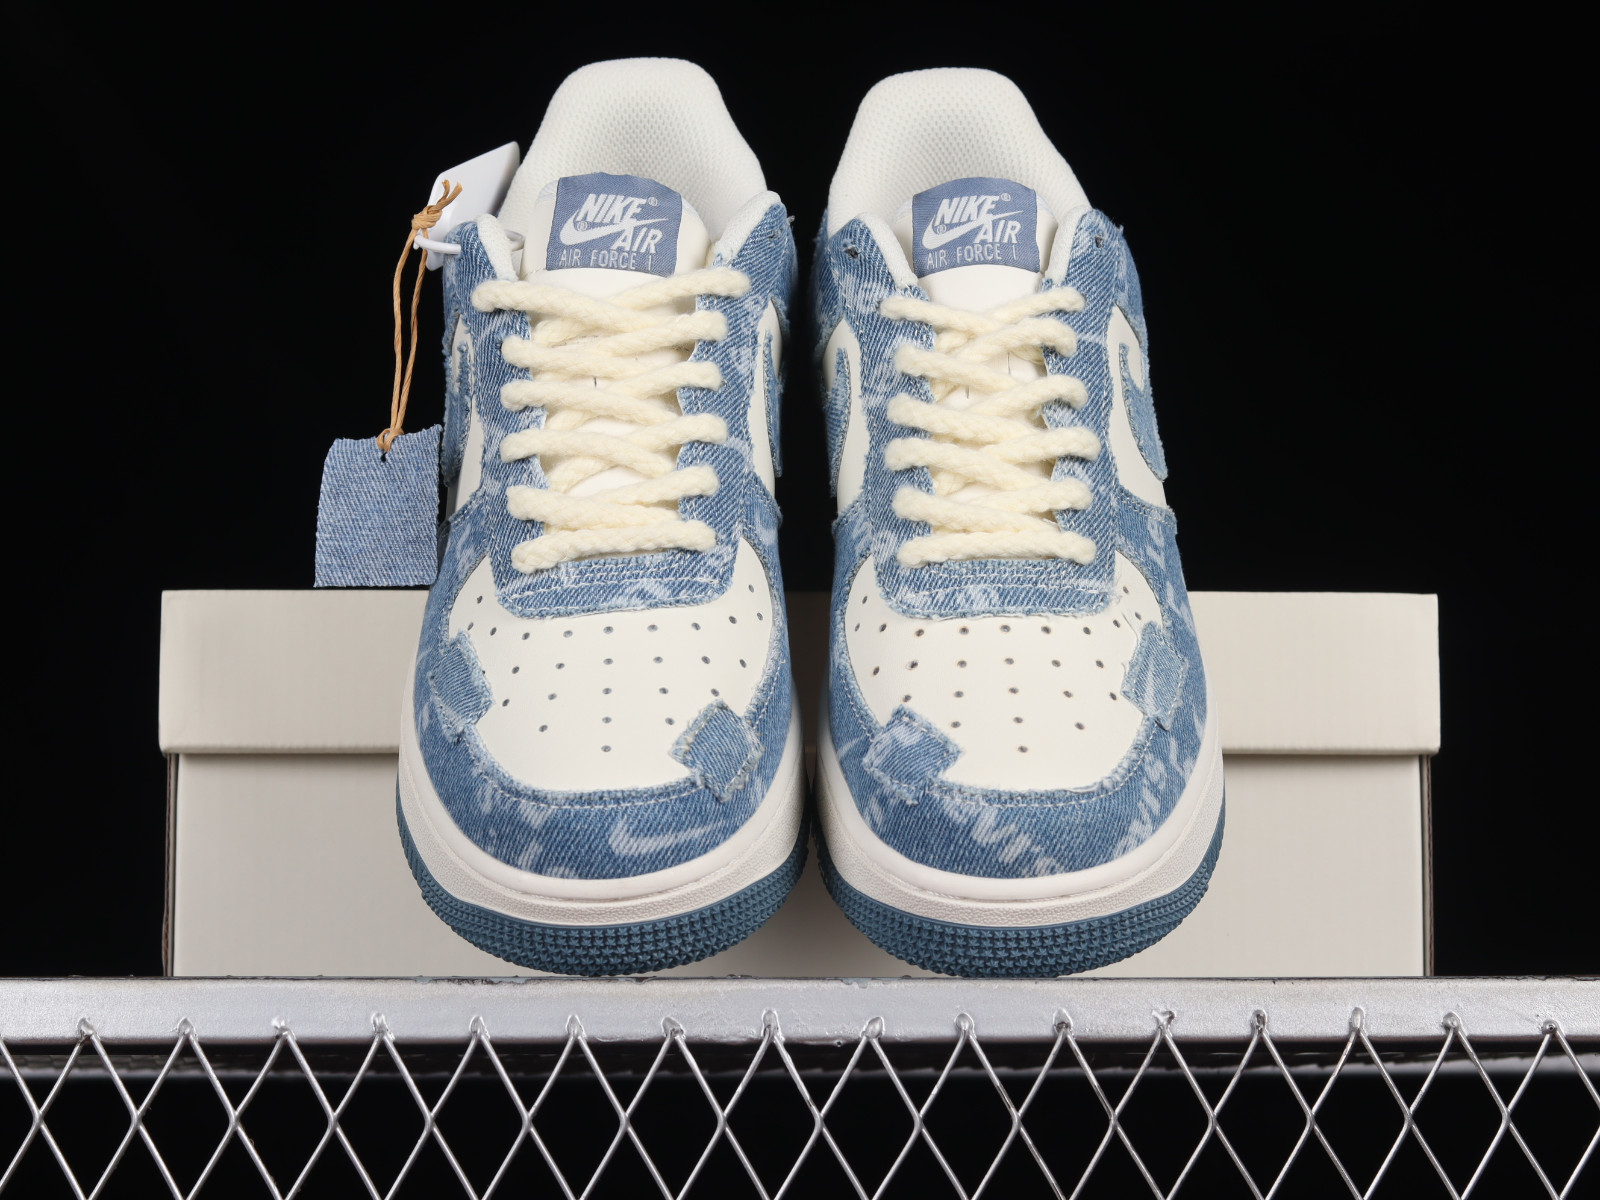 801 - Levis x Nike Air Force 1 07 Low Denim Blue White - The Shox Enigma will debut at Nike Sportswear spots like